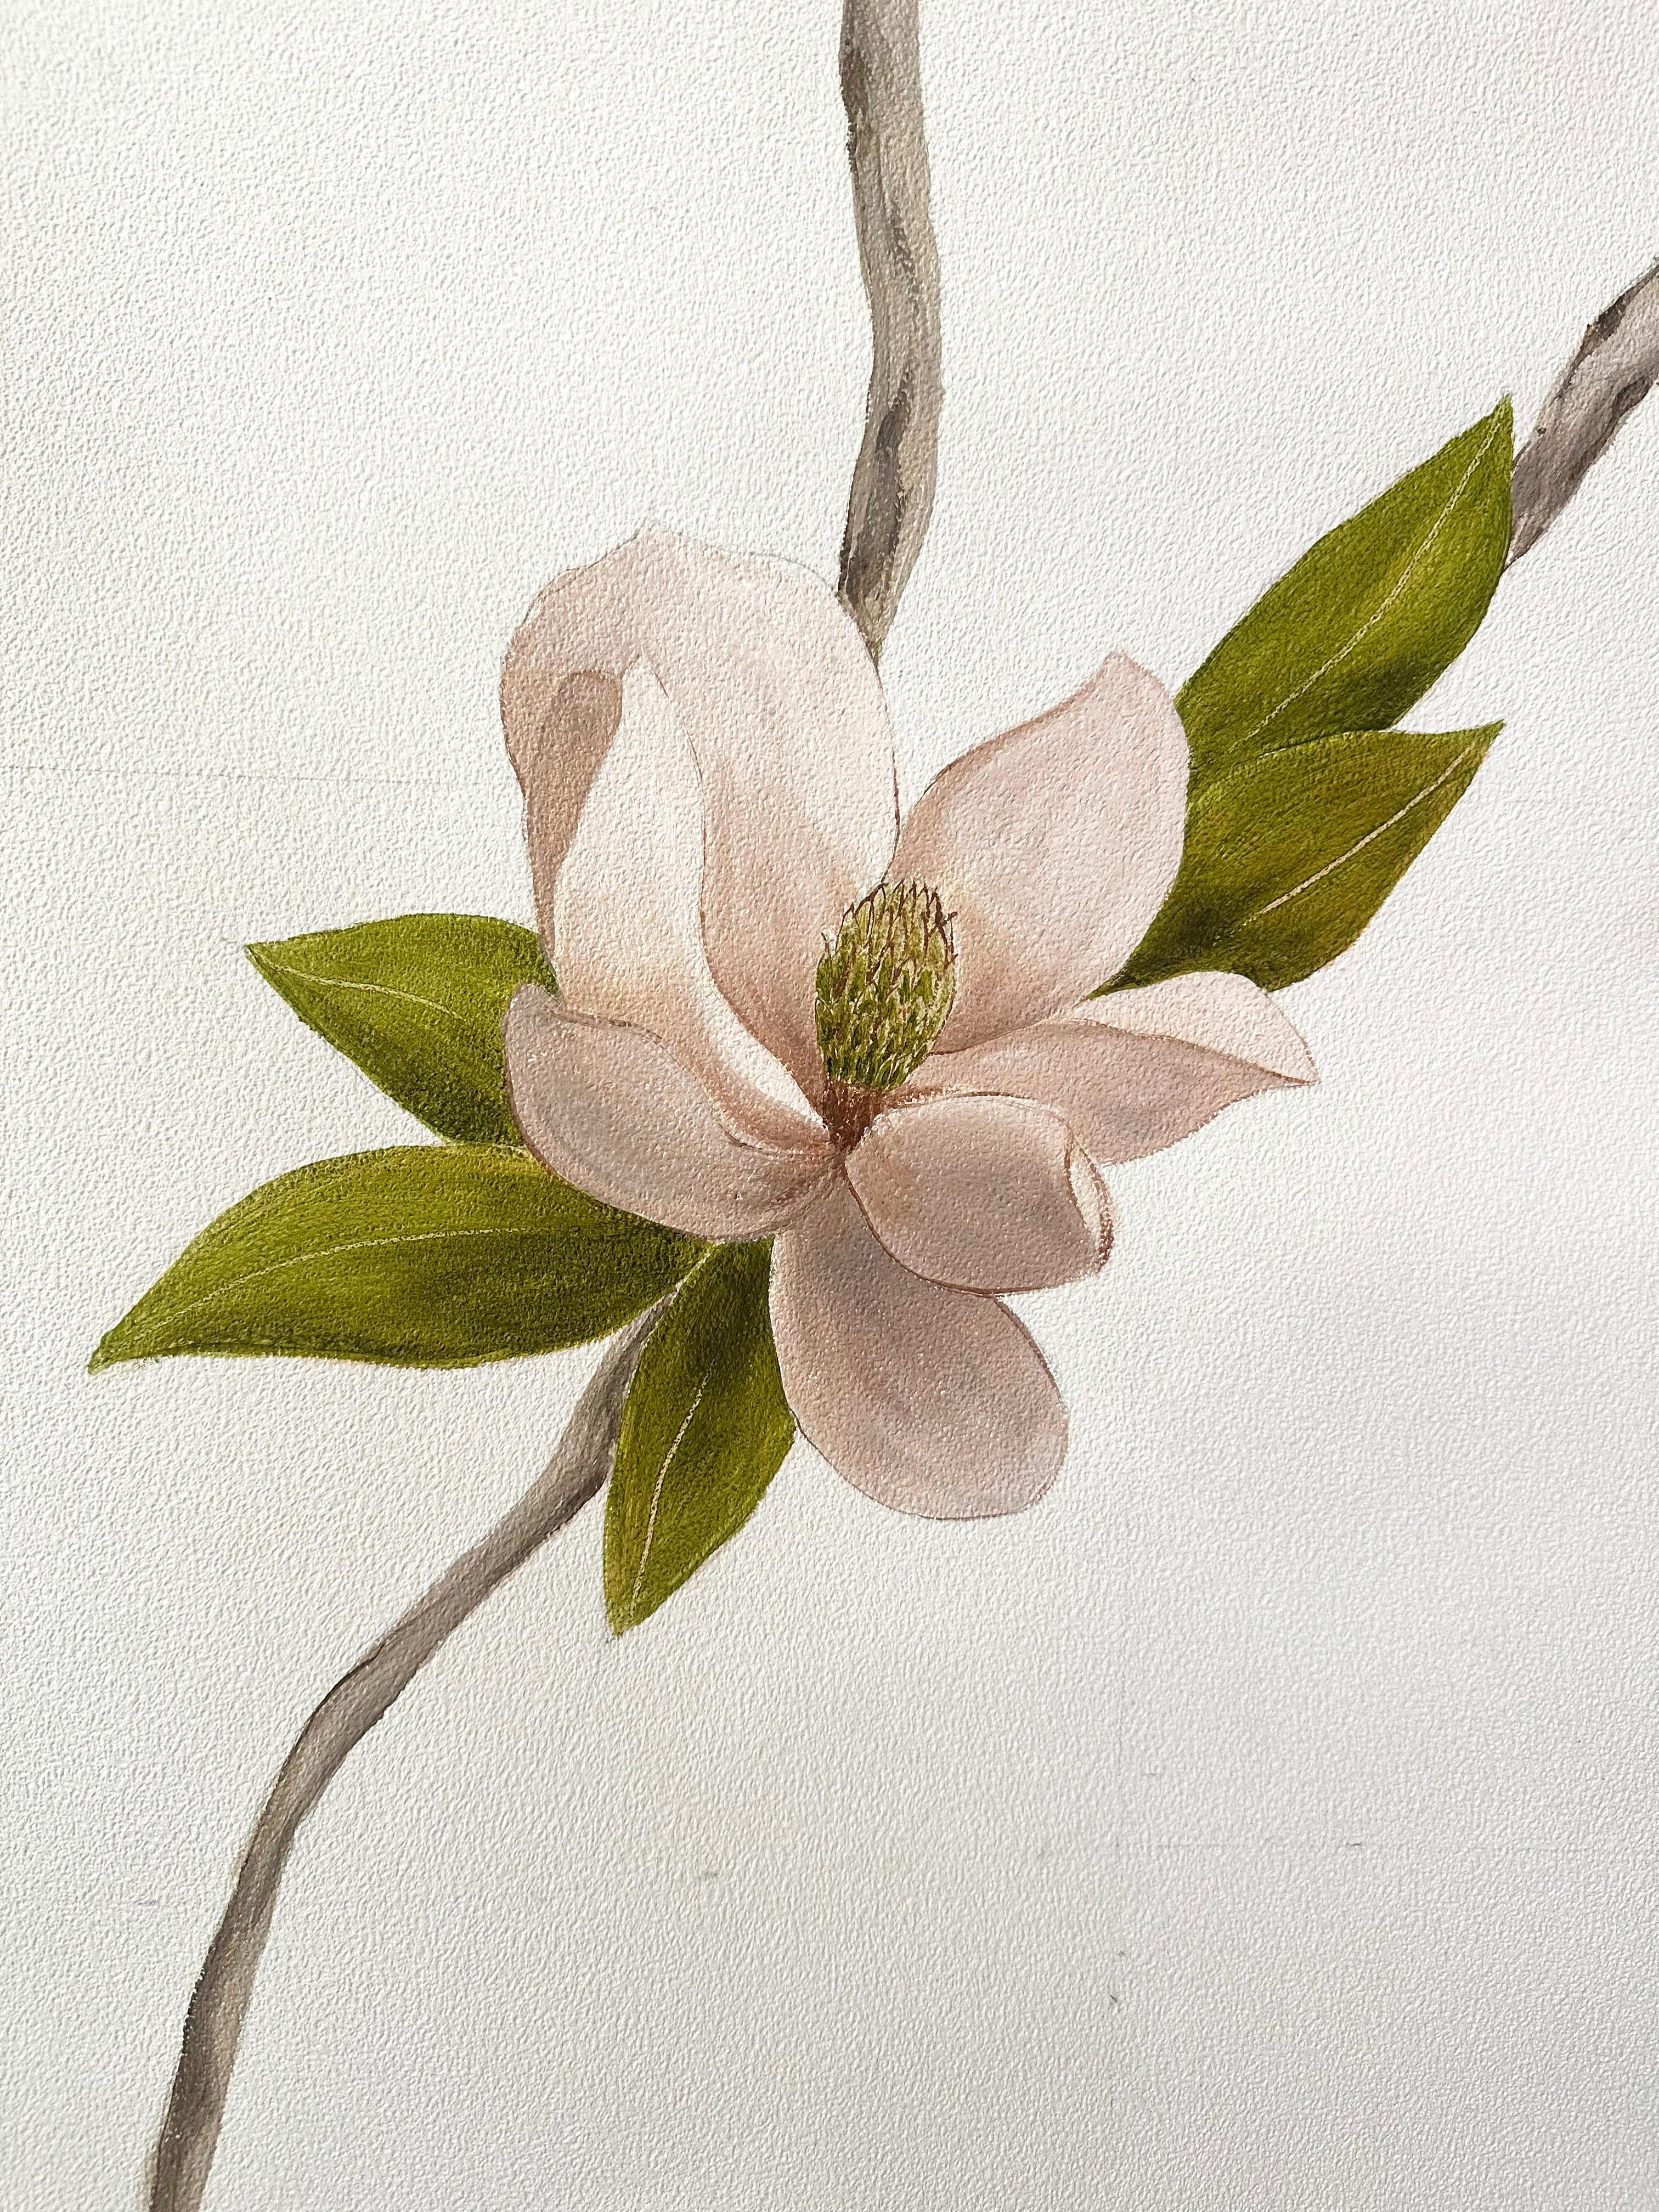 Hand-Painted Hand Painted Wallpaper Magnolia Botanical from Ocre Designs by Tarn McLean For Sale